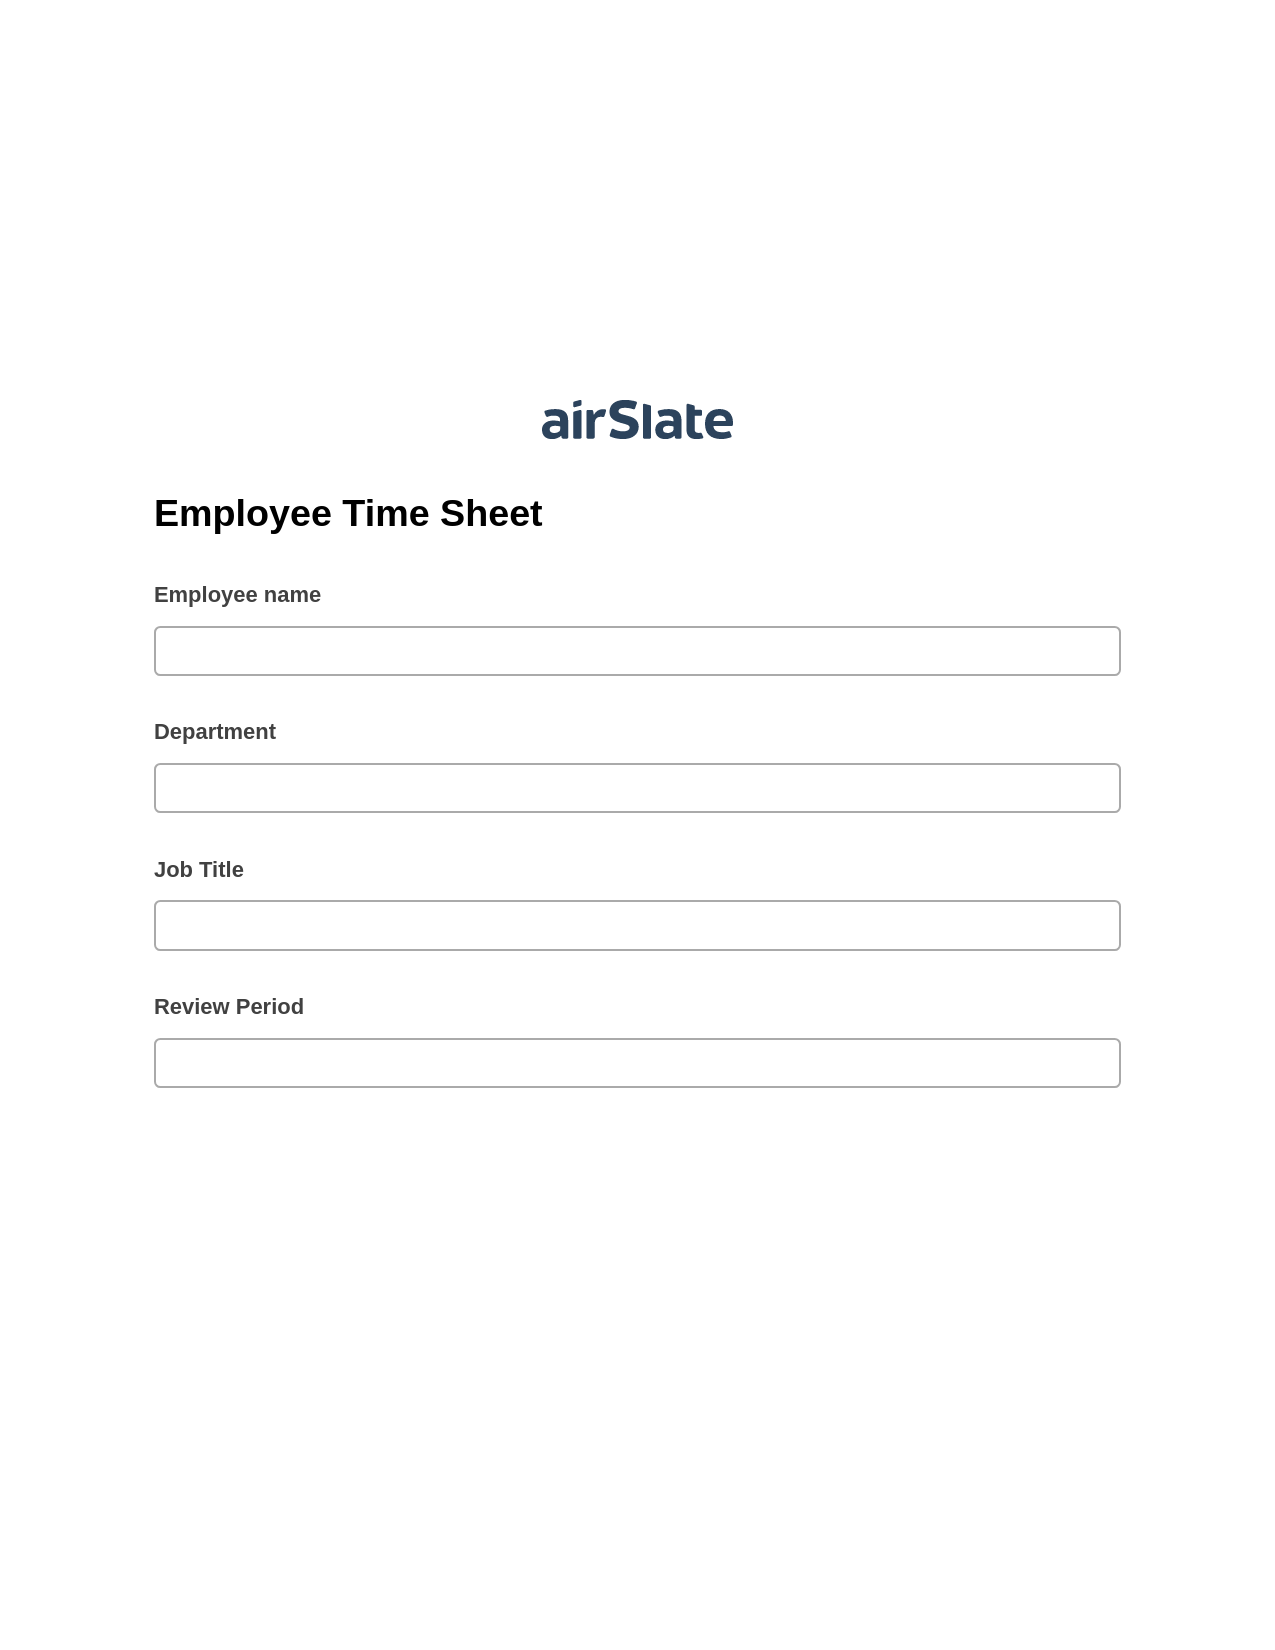 Multirole Employee Time Sheet Pre-fill from Office 365 Excel Bot, Remove Tags From Slate Bot, Export to Excel 365 Bot